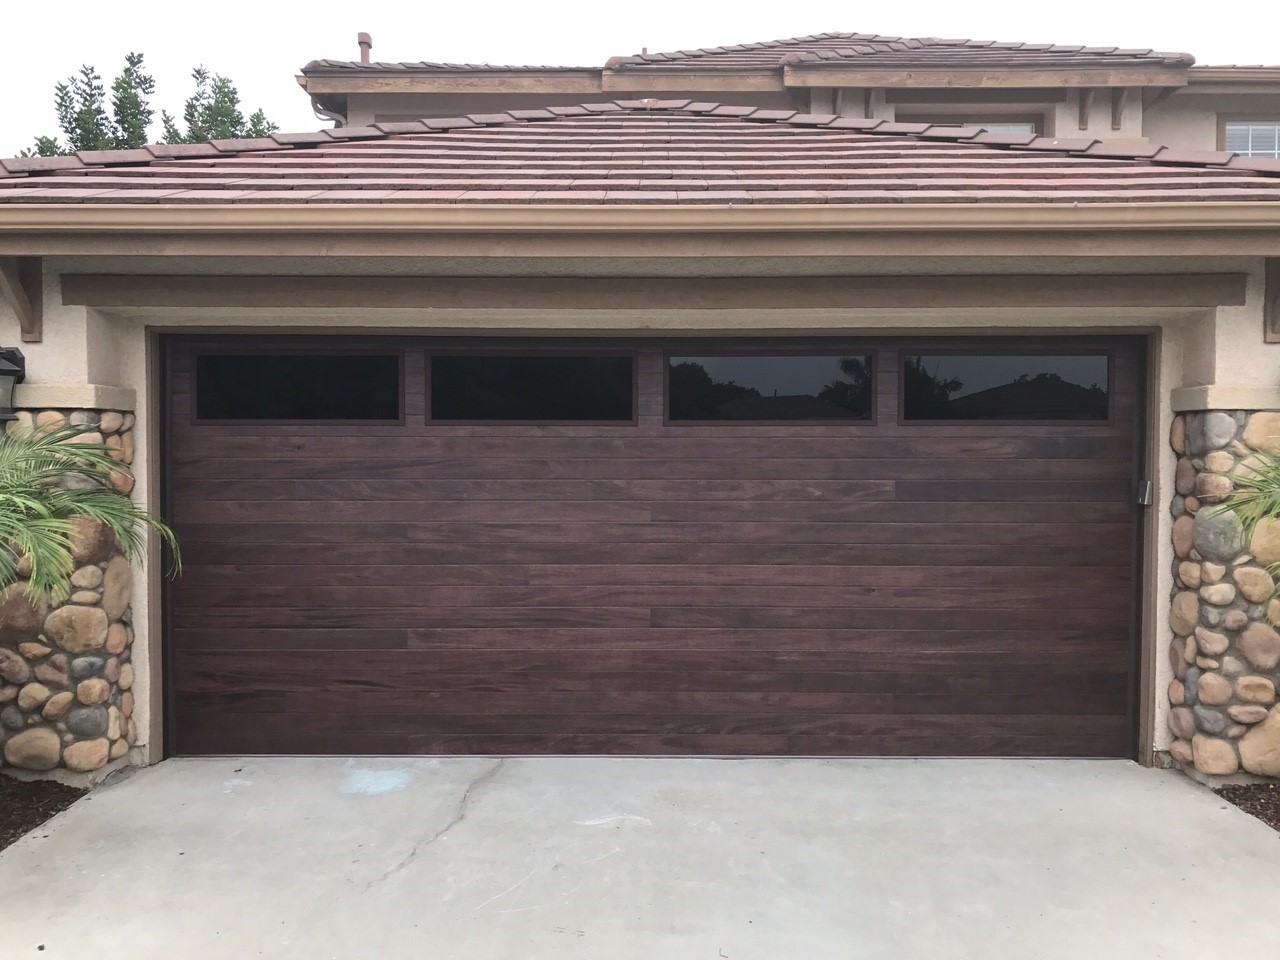 Flushed Panel Faux Wood Garage Door with Clear Windows